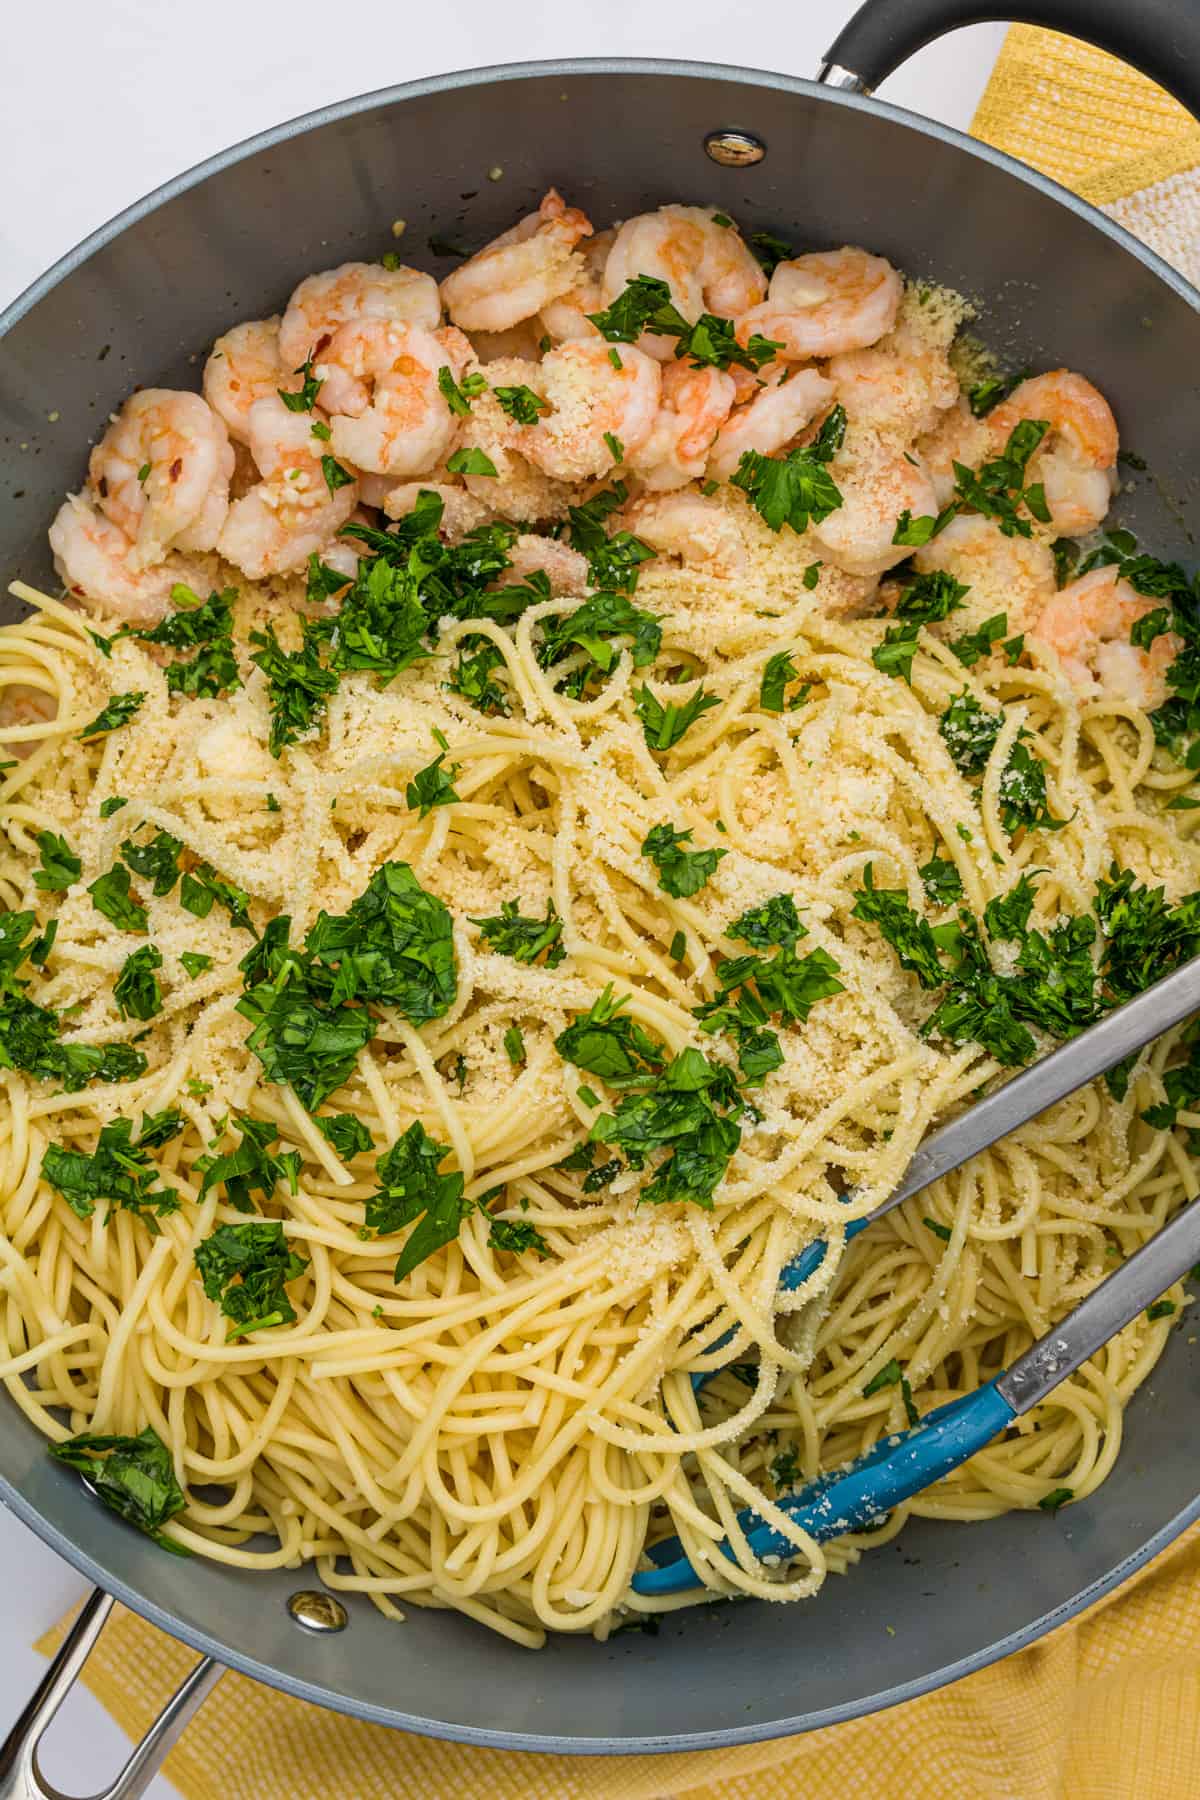 Metal skillet with spaghetti noodles, cooked shrimp, chopped fresh parsley and grated Parmesan cheese being mixed together with tongs.